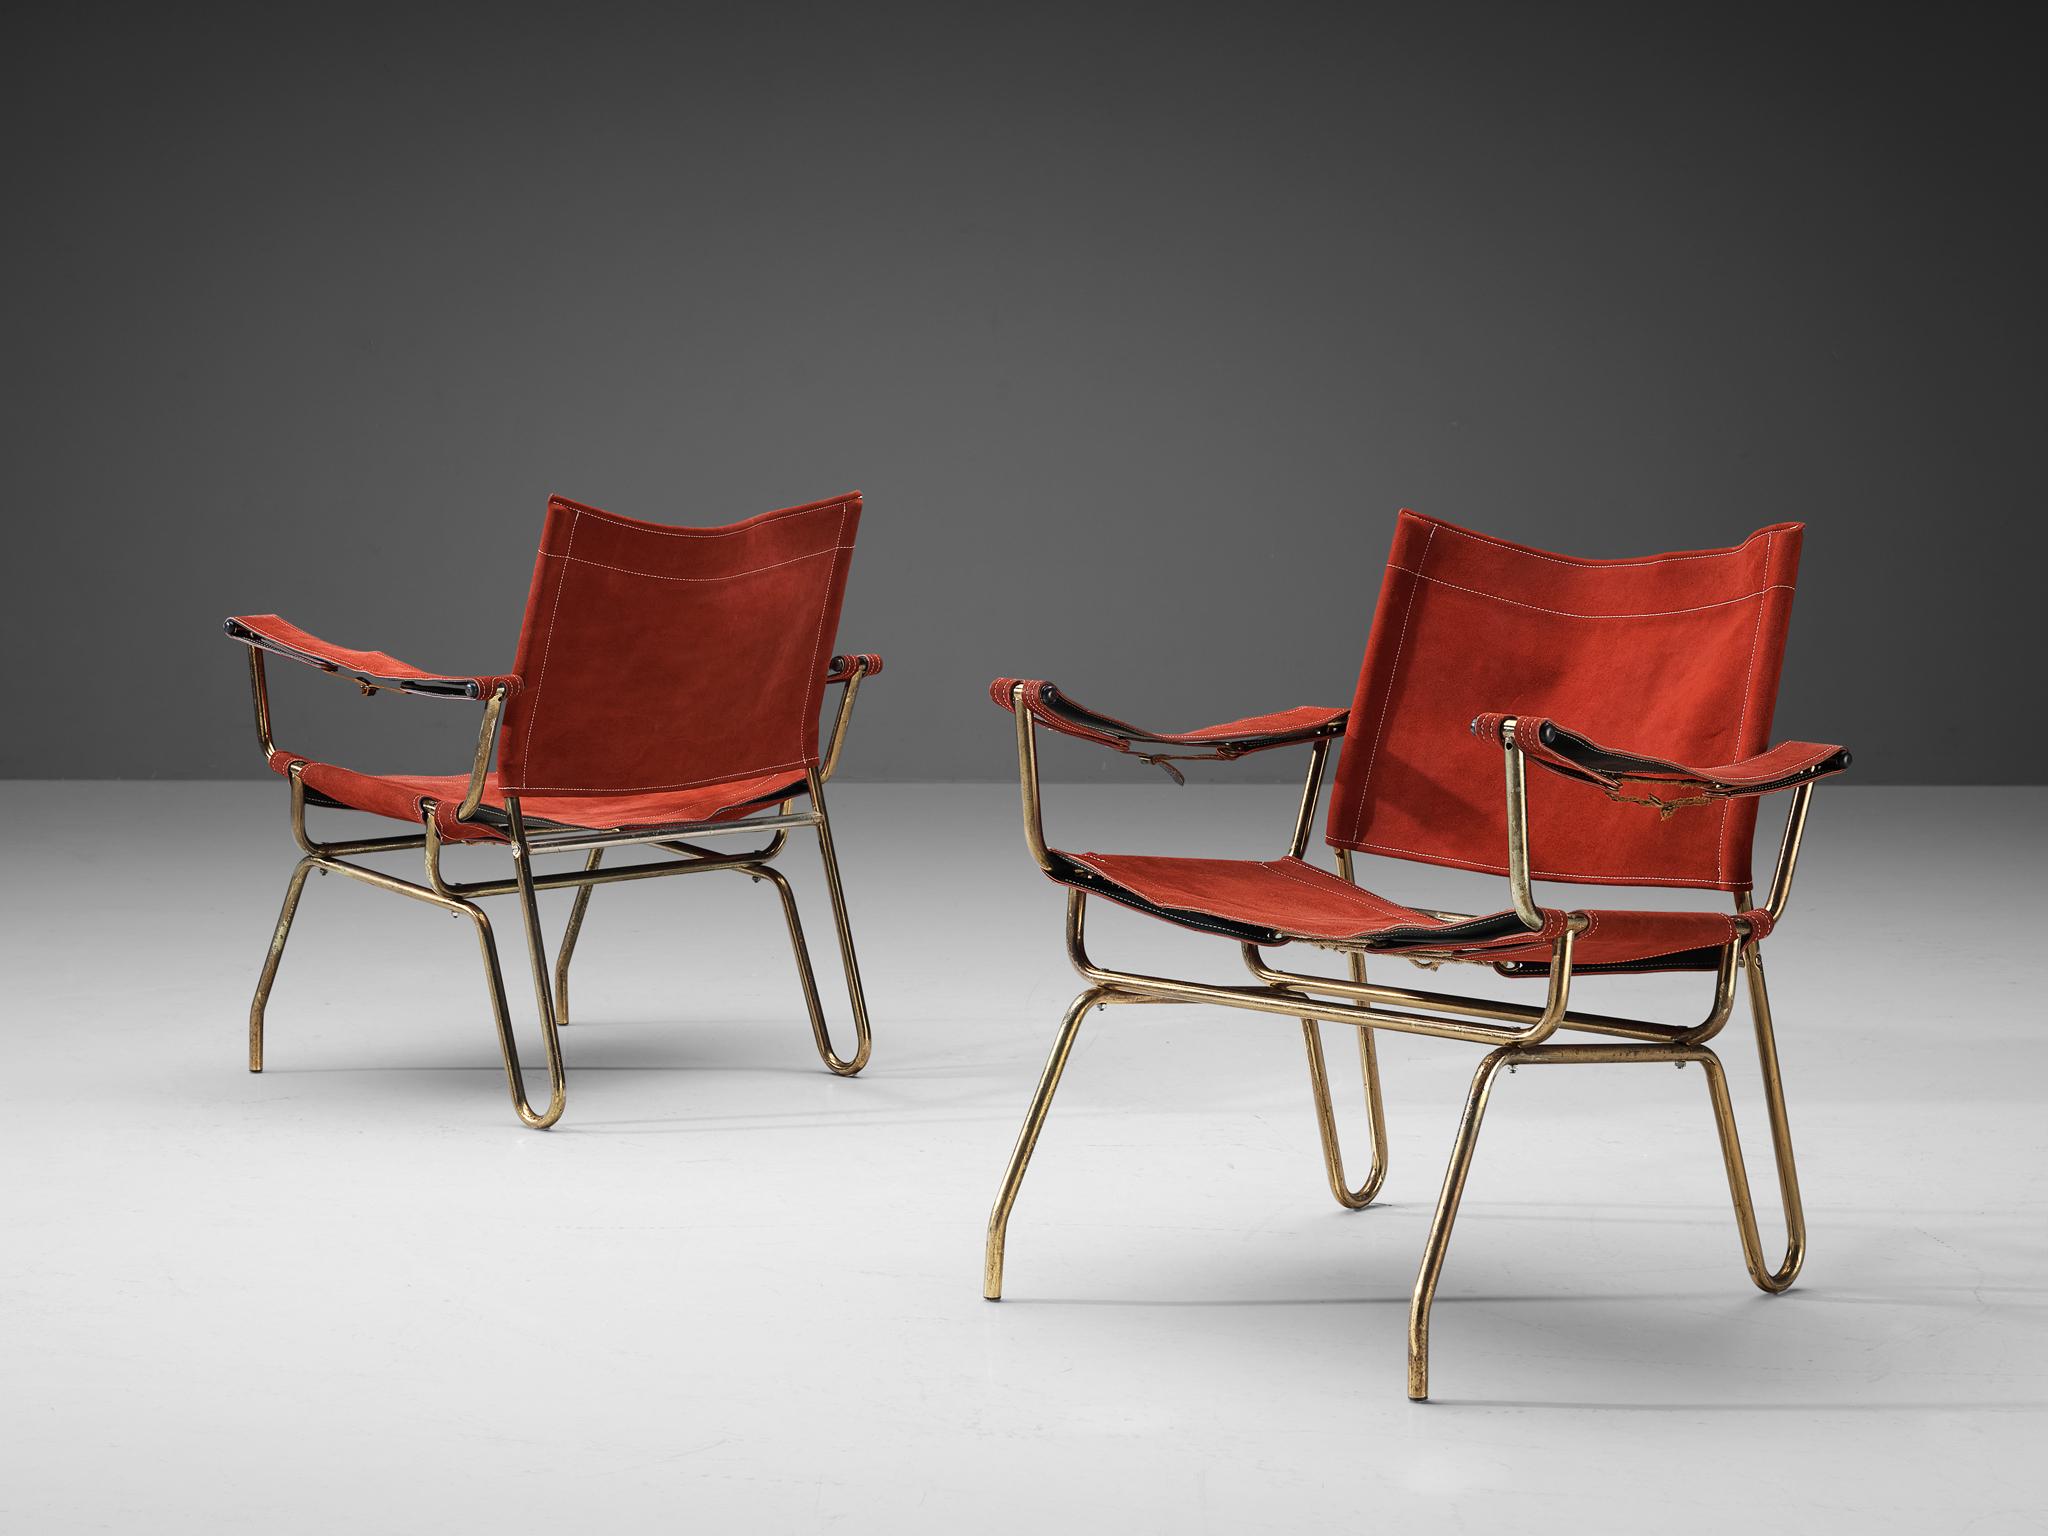 A. Dolleman for Metz & Co., pair of armchairs, suede brass, The Netherlands, 1960 

This rare pair of modernist lounge chairs embodies a unique, appealing design. The tubular brass frame is sleek and is beautifully bent into shape. The seat and